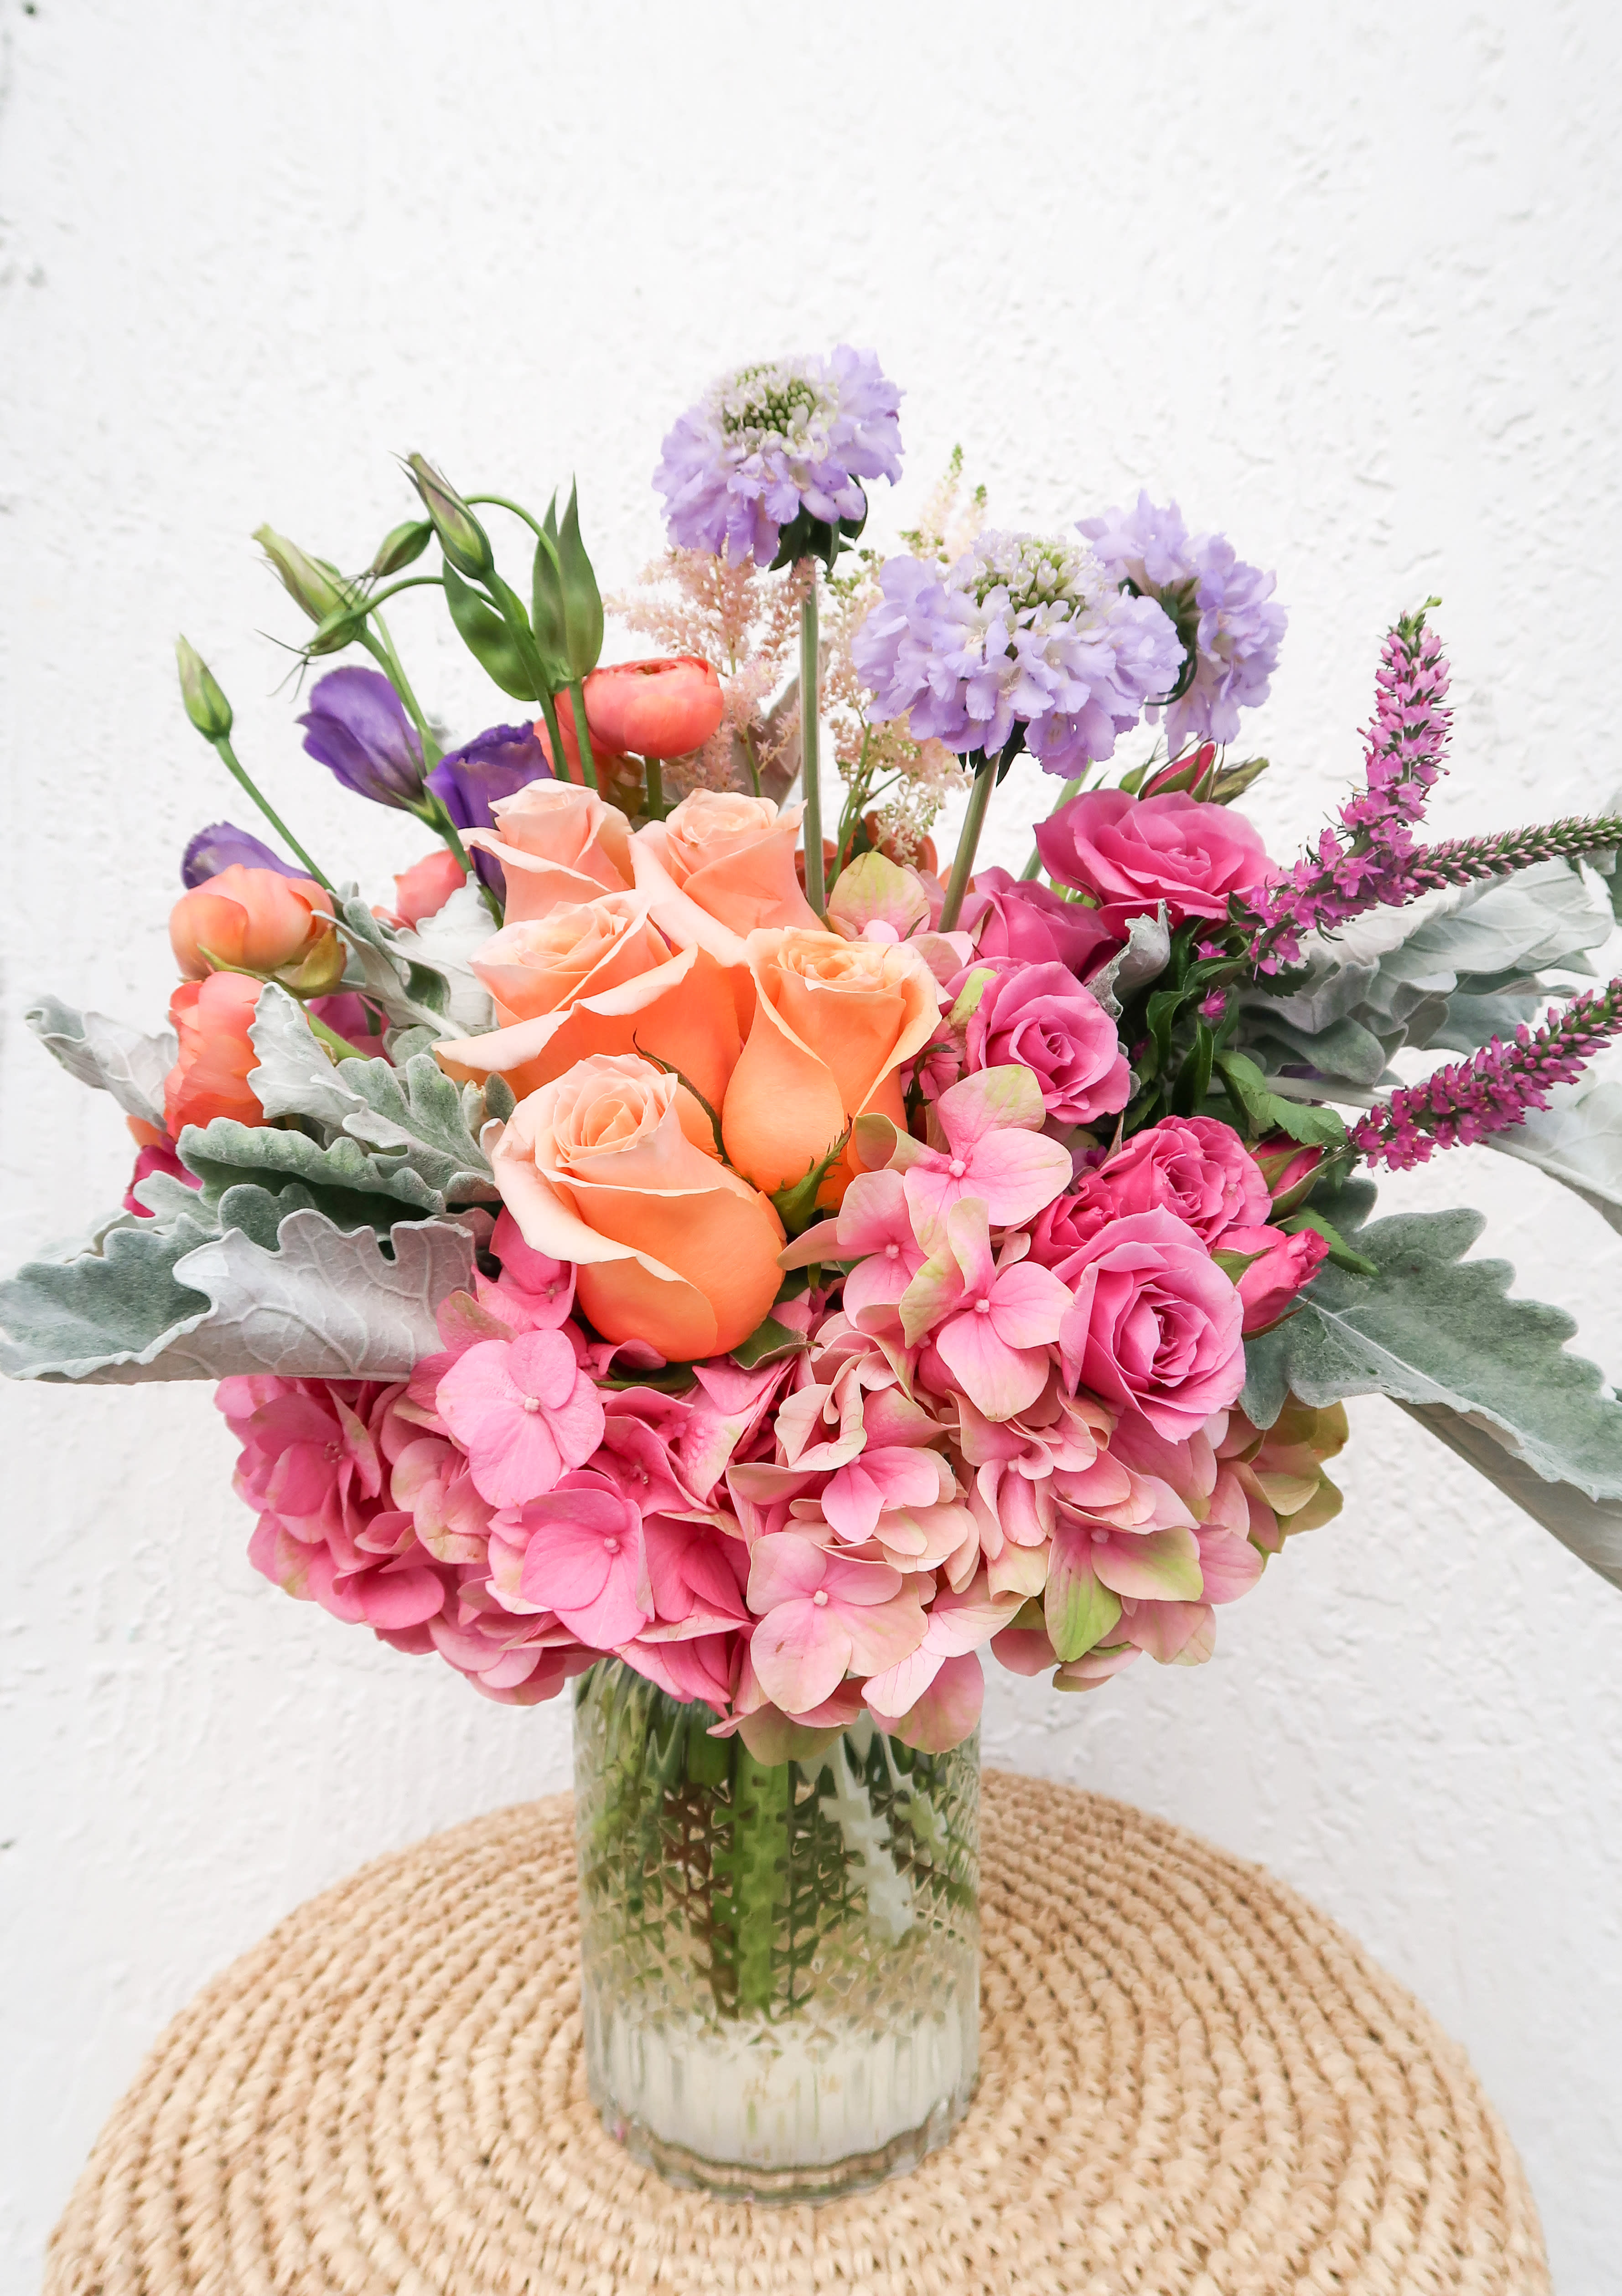 Pop of Color  - Brighten someones day with a pop of color! Perfect for all occasions. This arrangement if filled with the seasons favorite blooms. 